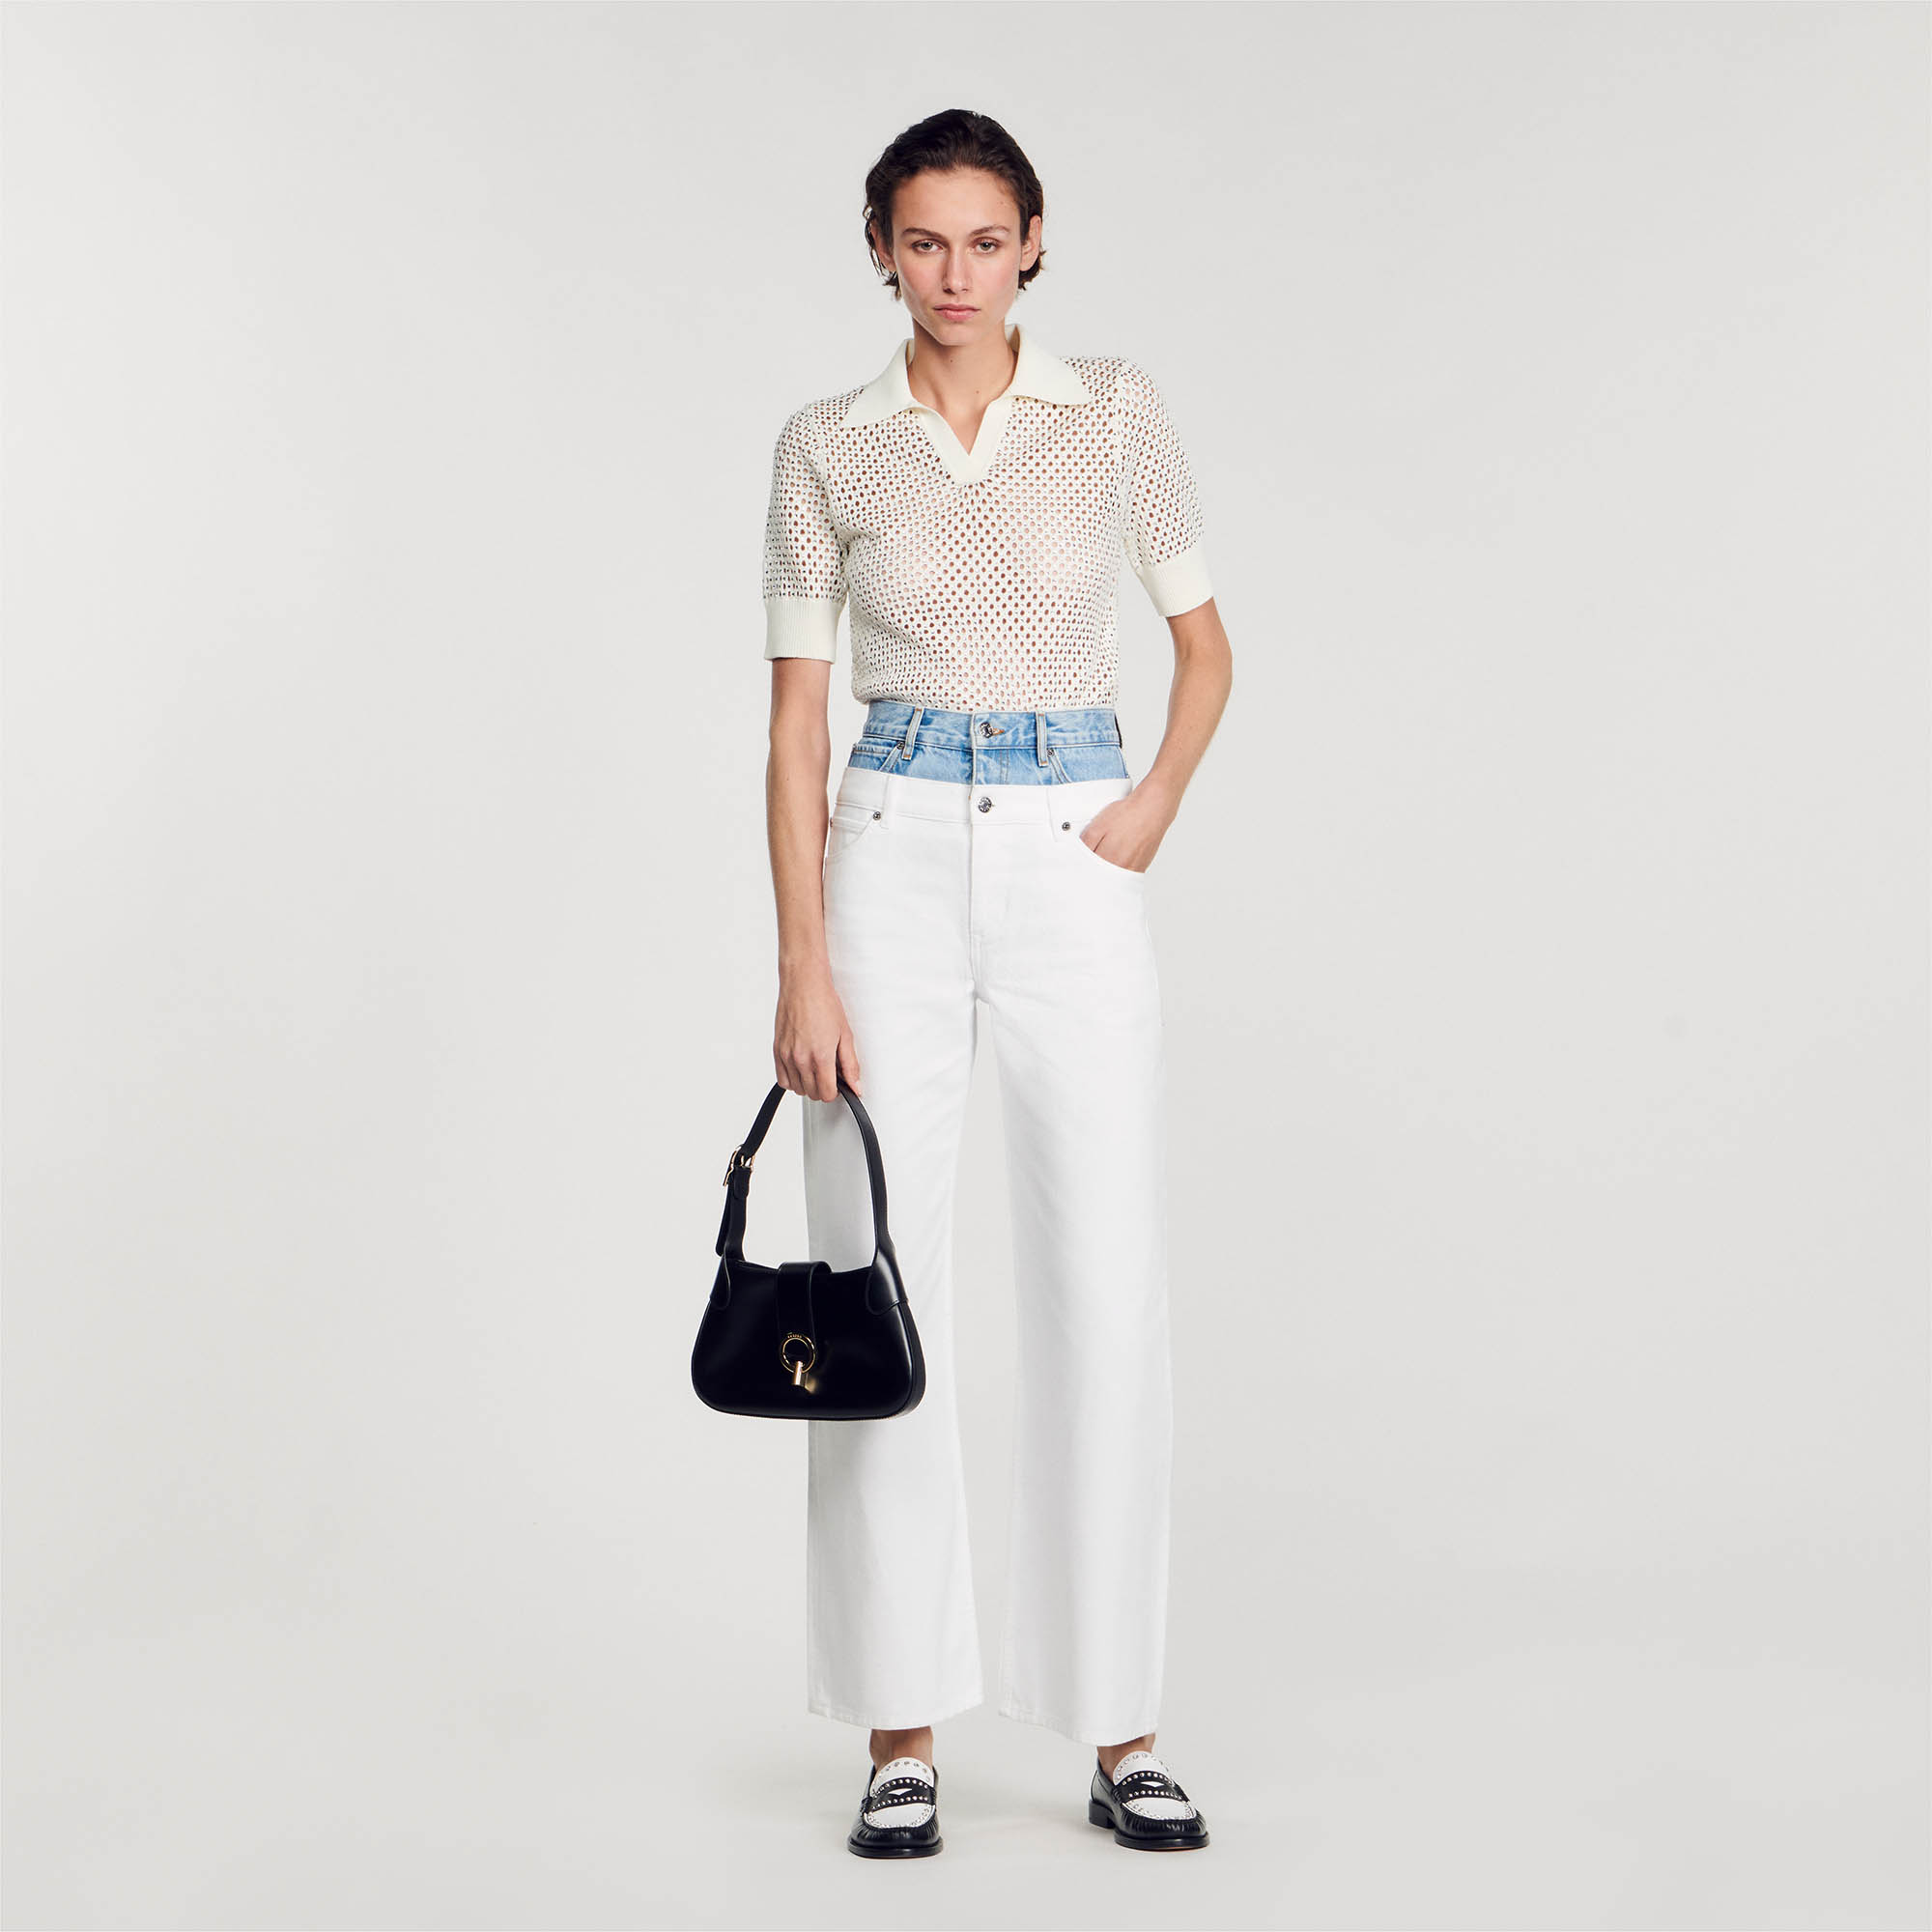 Sandro cotton Lining: High-waisted straight-leg jeans in two-tone denim with 5 pockets and double waistband